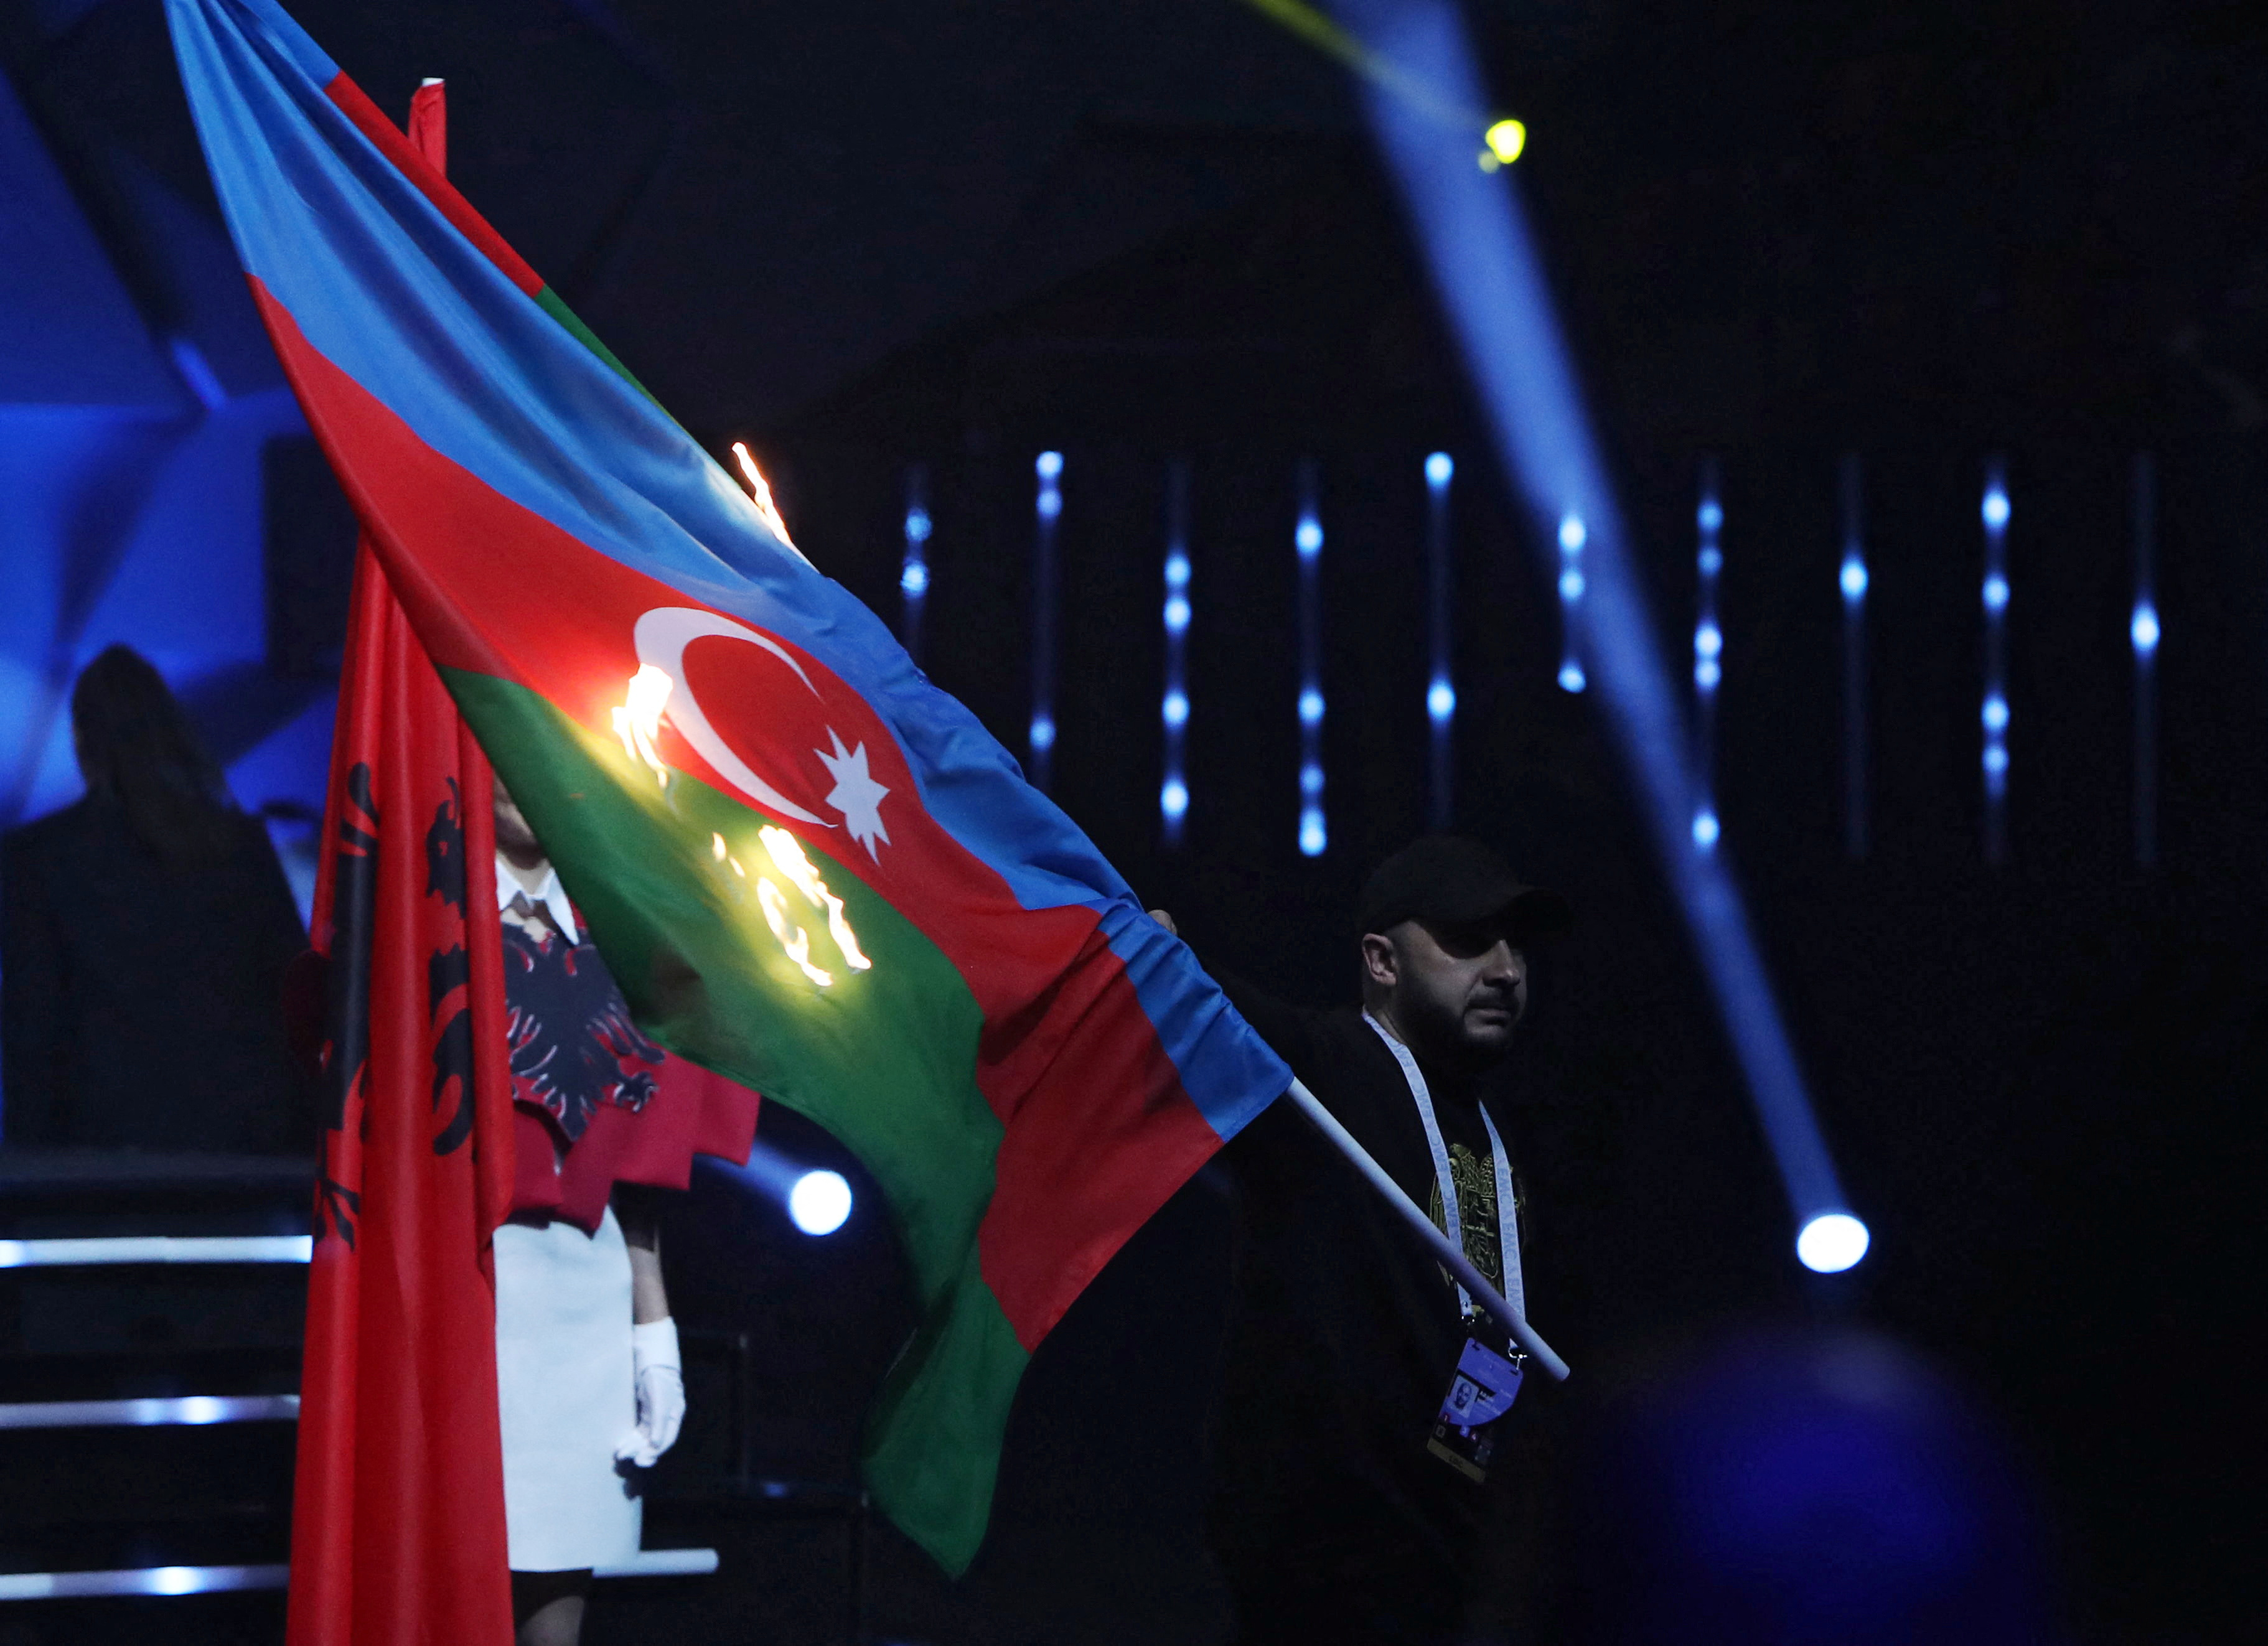 They burned the Azerbaijan flag and the entire delegation left the European Weightlifting Championships